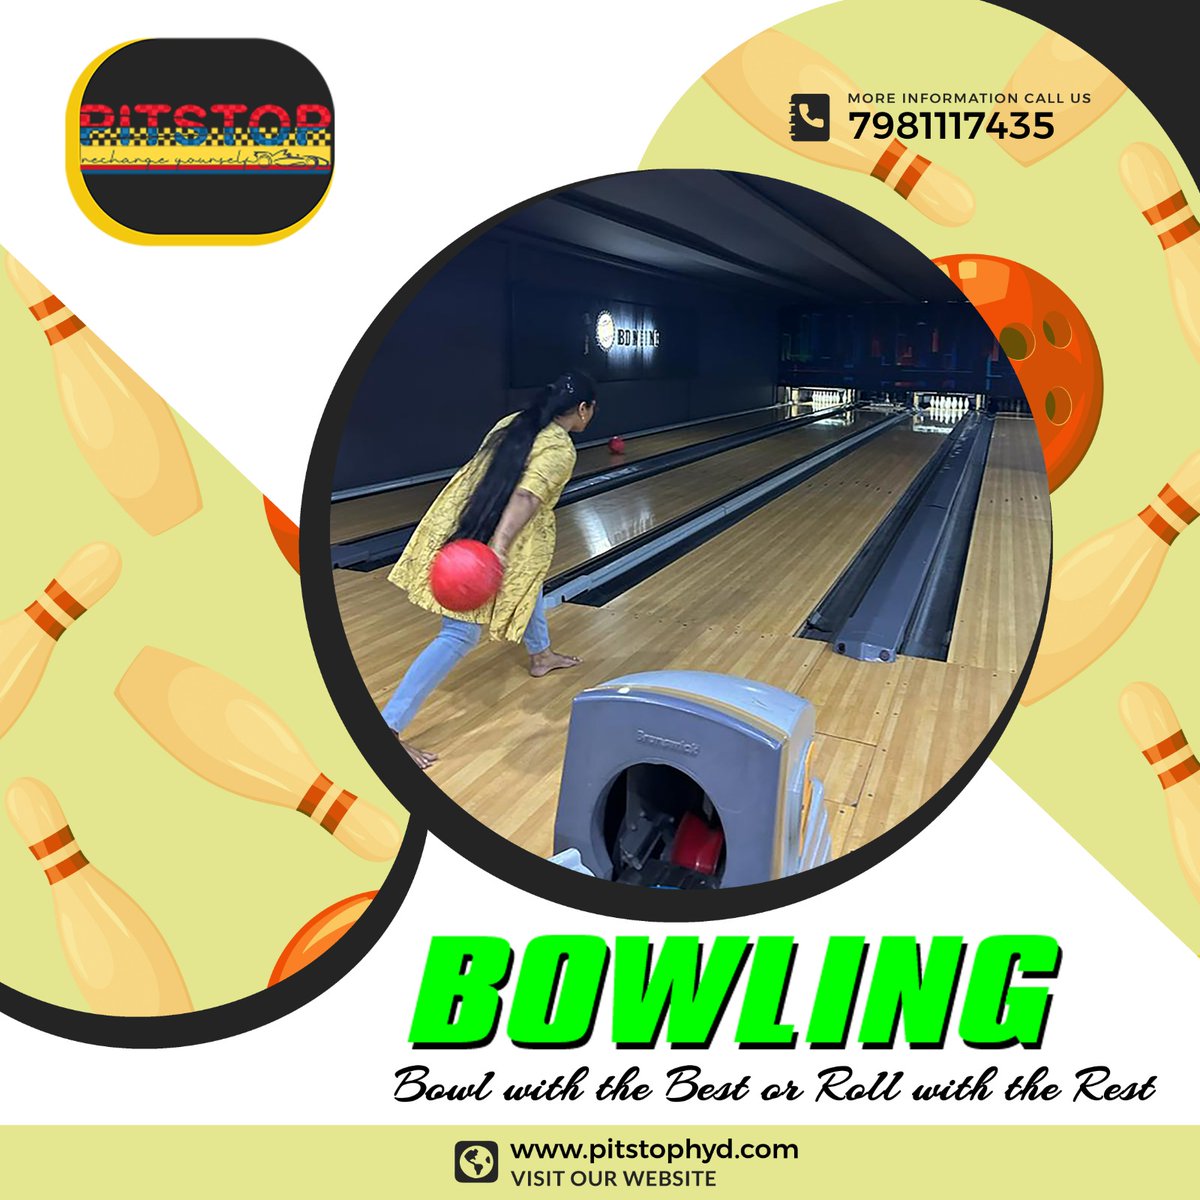 𝐁𝐎𝐖𝐋𝐈𝐍𝐆 - 𝐏𝐈𝐓𝐒𝐓𝐎𝐏
Bowl with the Best or Roll with the Rest.

For Inquiries - 7981117435
Visit: pitstophyd.com
.
.
.
#pitstop #pitstophyderabad #bowling #bowlingchallenge #BowlingAlley #bowlingclub #BowlingFun #BowlingStrike #NecklaceRoad #Hyderabad